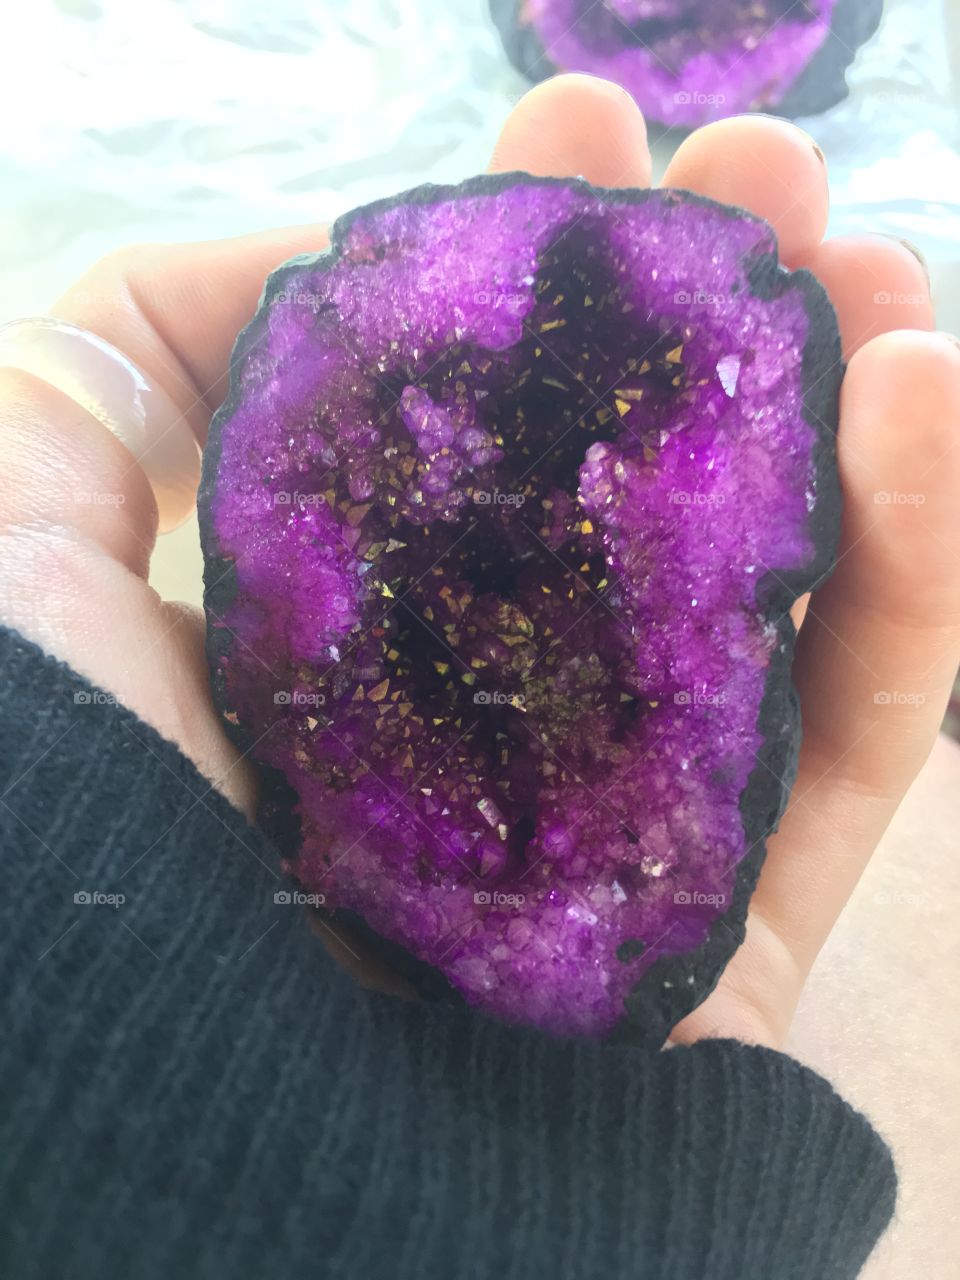 Gorgeous black and purple dyed geode from the Gem and Mineral Fair in Tooele, UT Sept. 22nd 2018